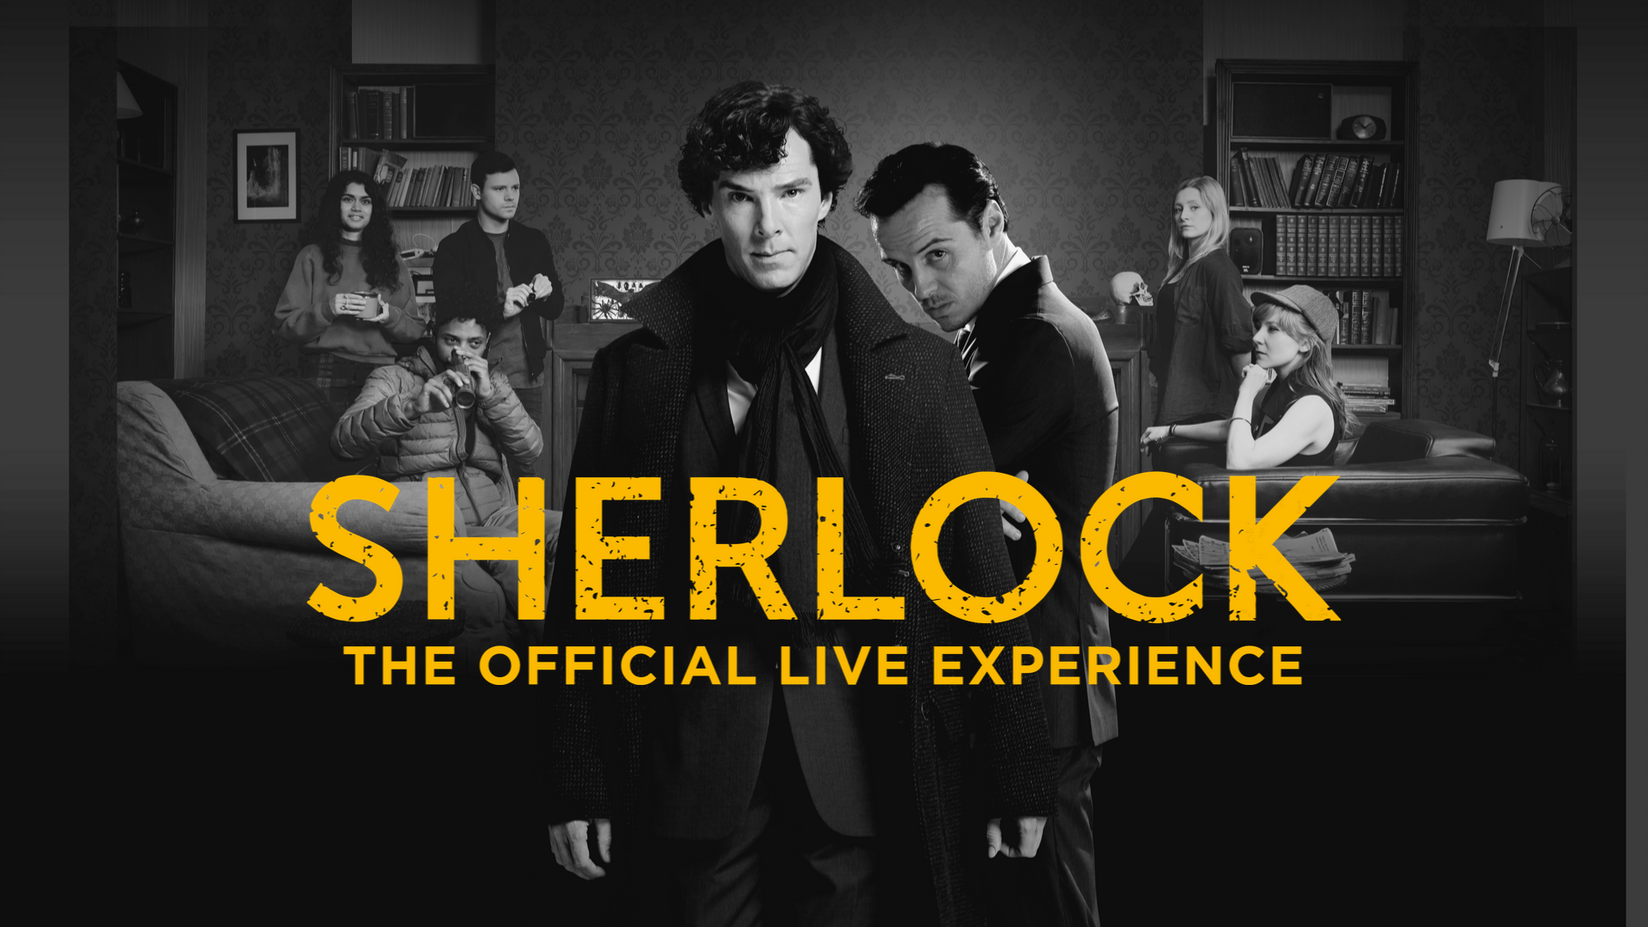 Sherlock – the Game is Now